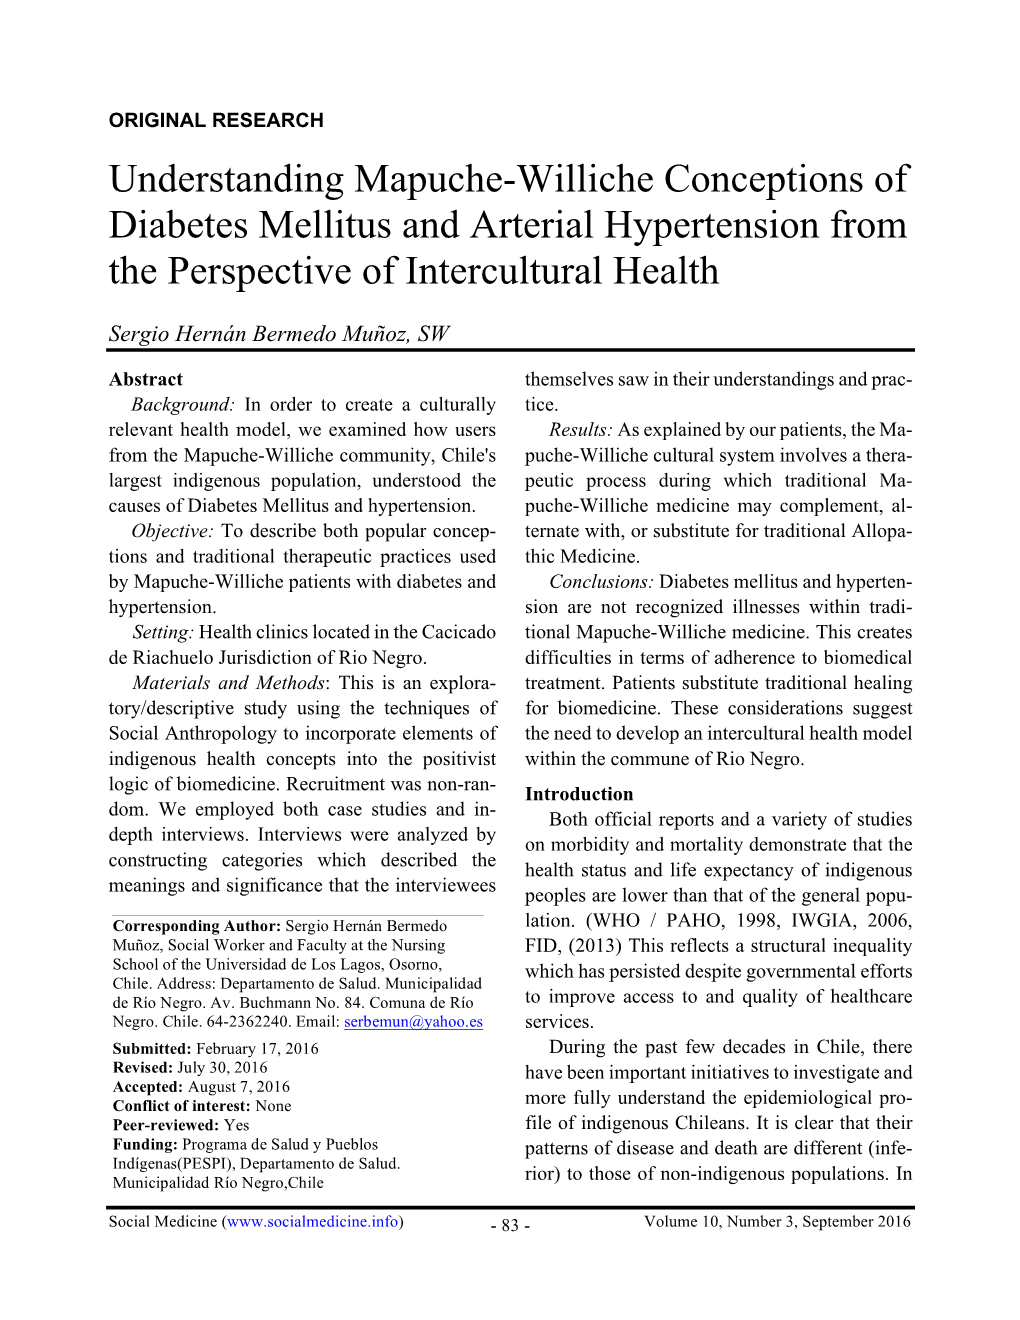 Understanding Mapuche-Williche Conceptions of Diabetes Mellitus and Arterial Hypertension from the Perspective of Intercultural Health